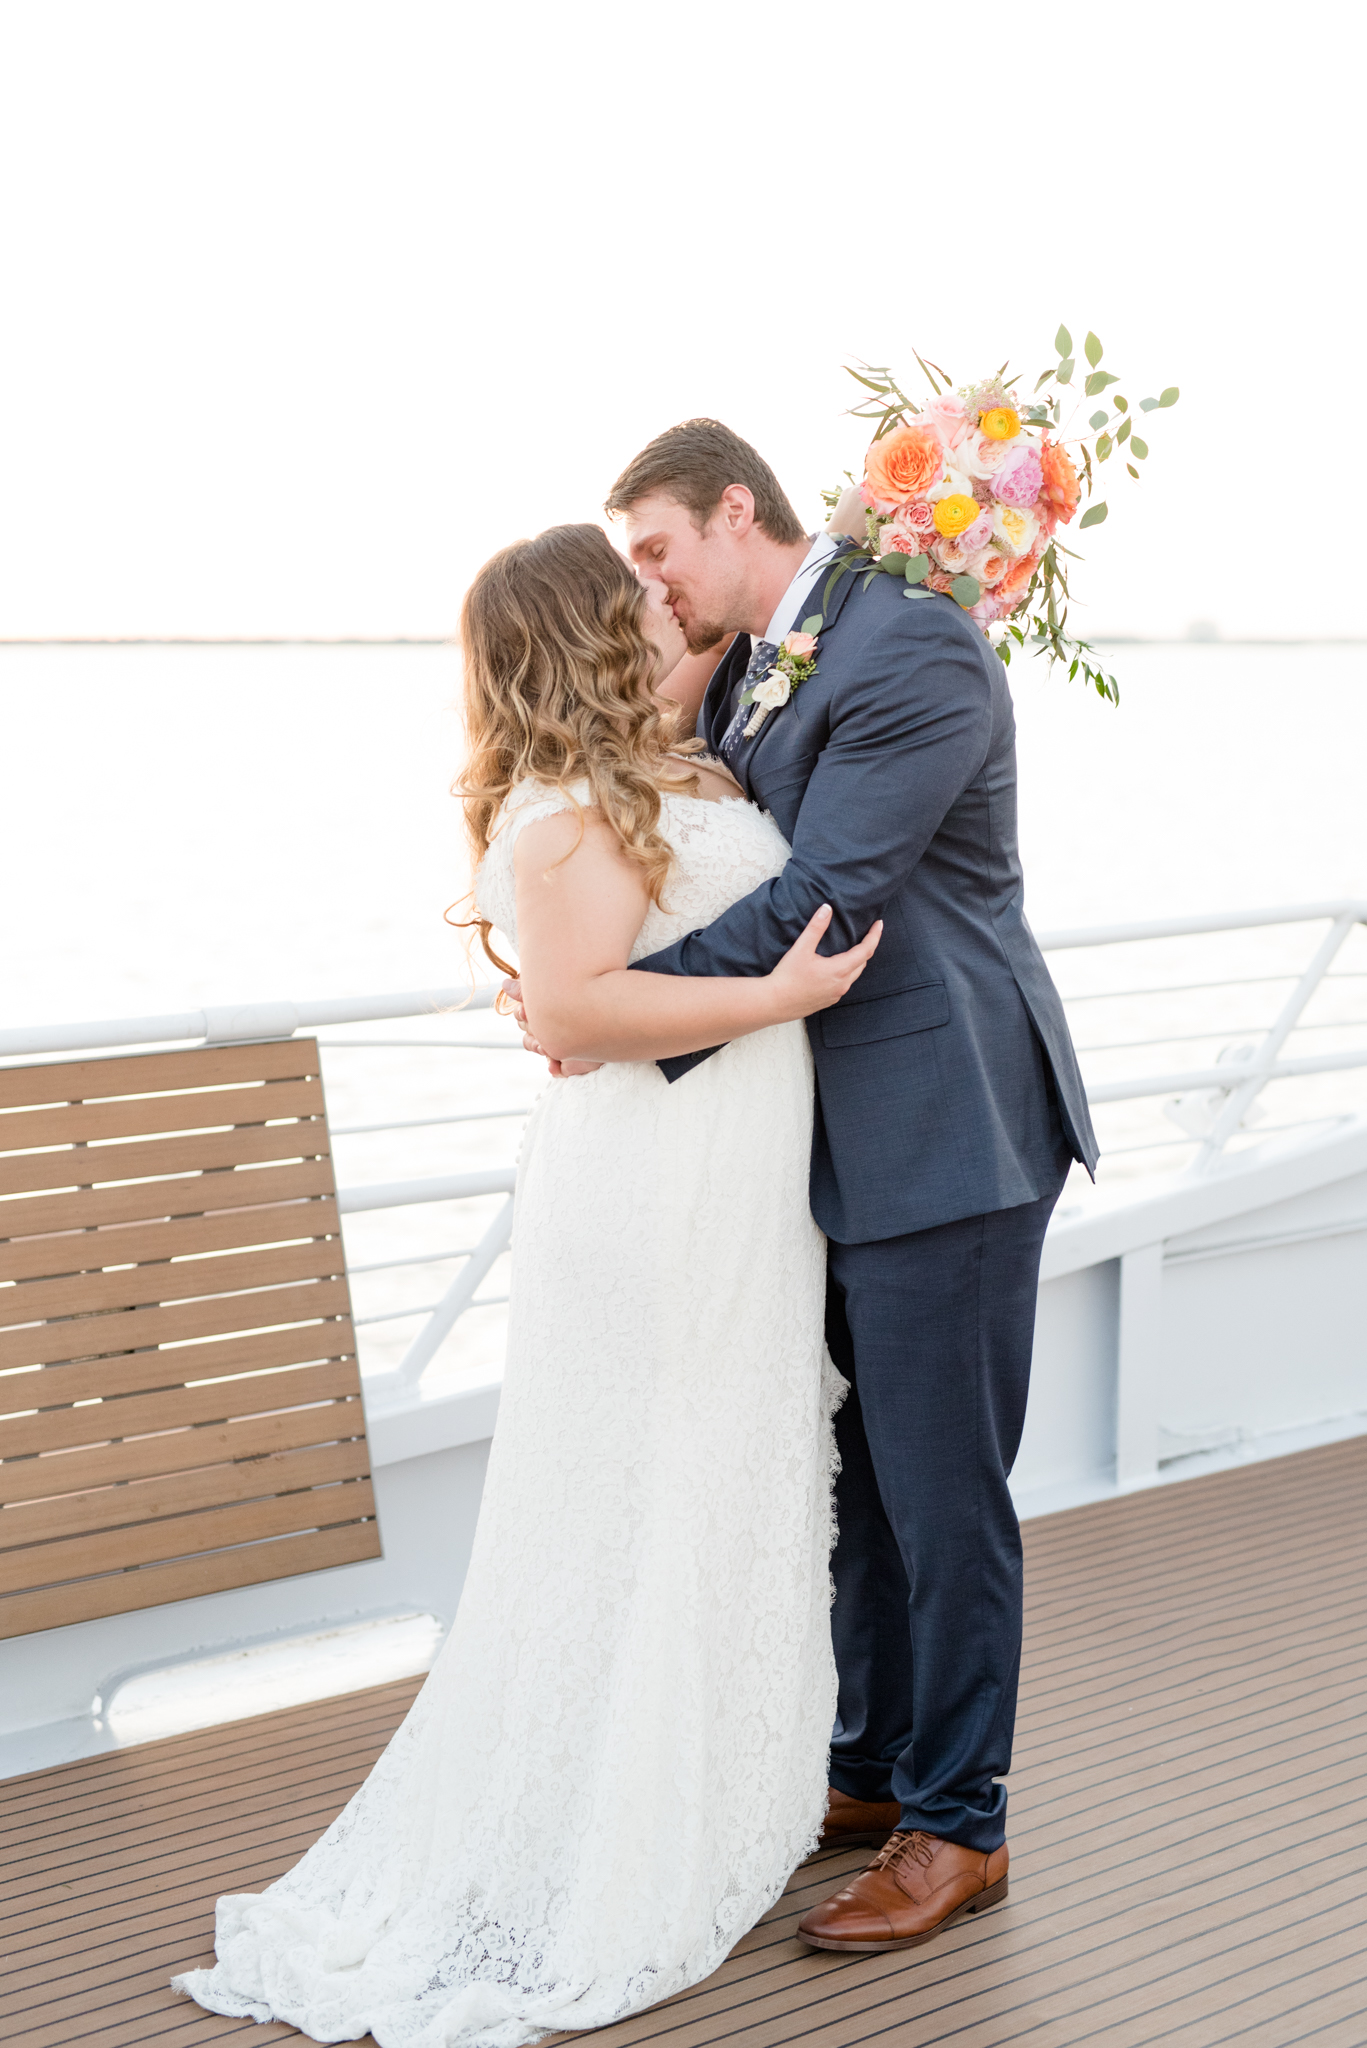 Bride and groom kiss on deck of yacht.